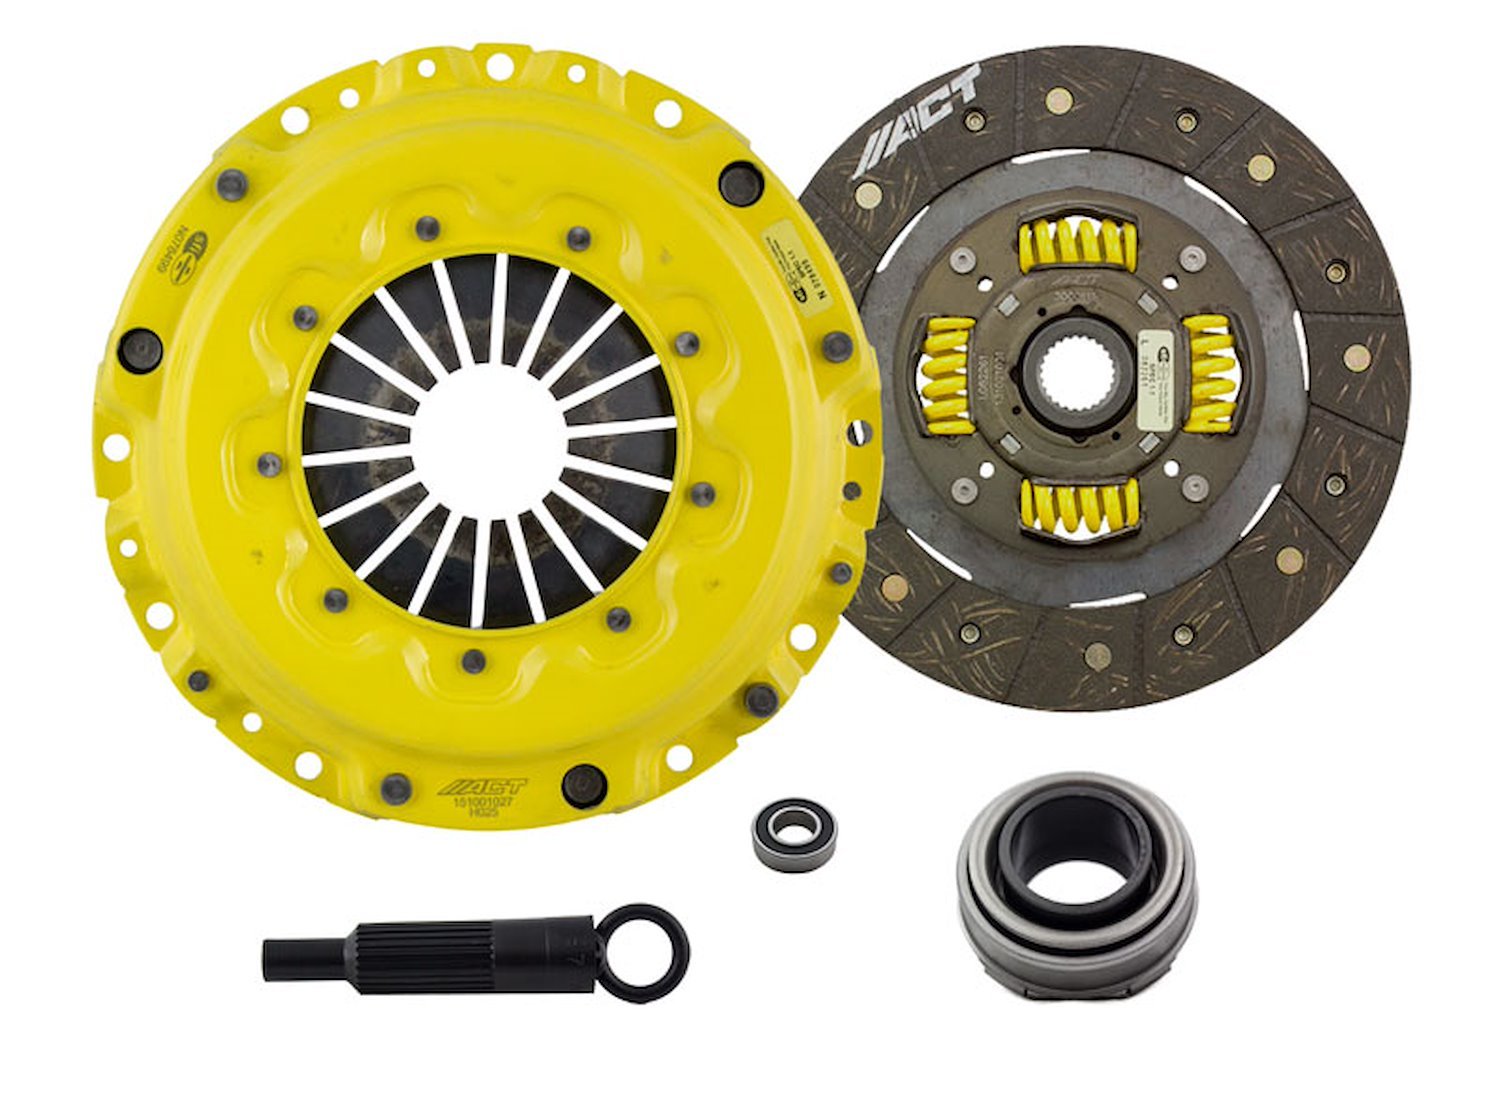 HD/Performance Street Sprung Transmission Clutch Kit Fits Select Acura/Honda